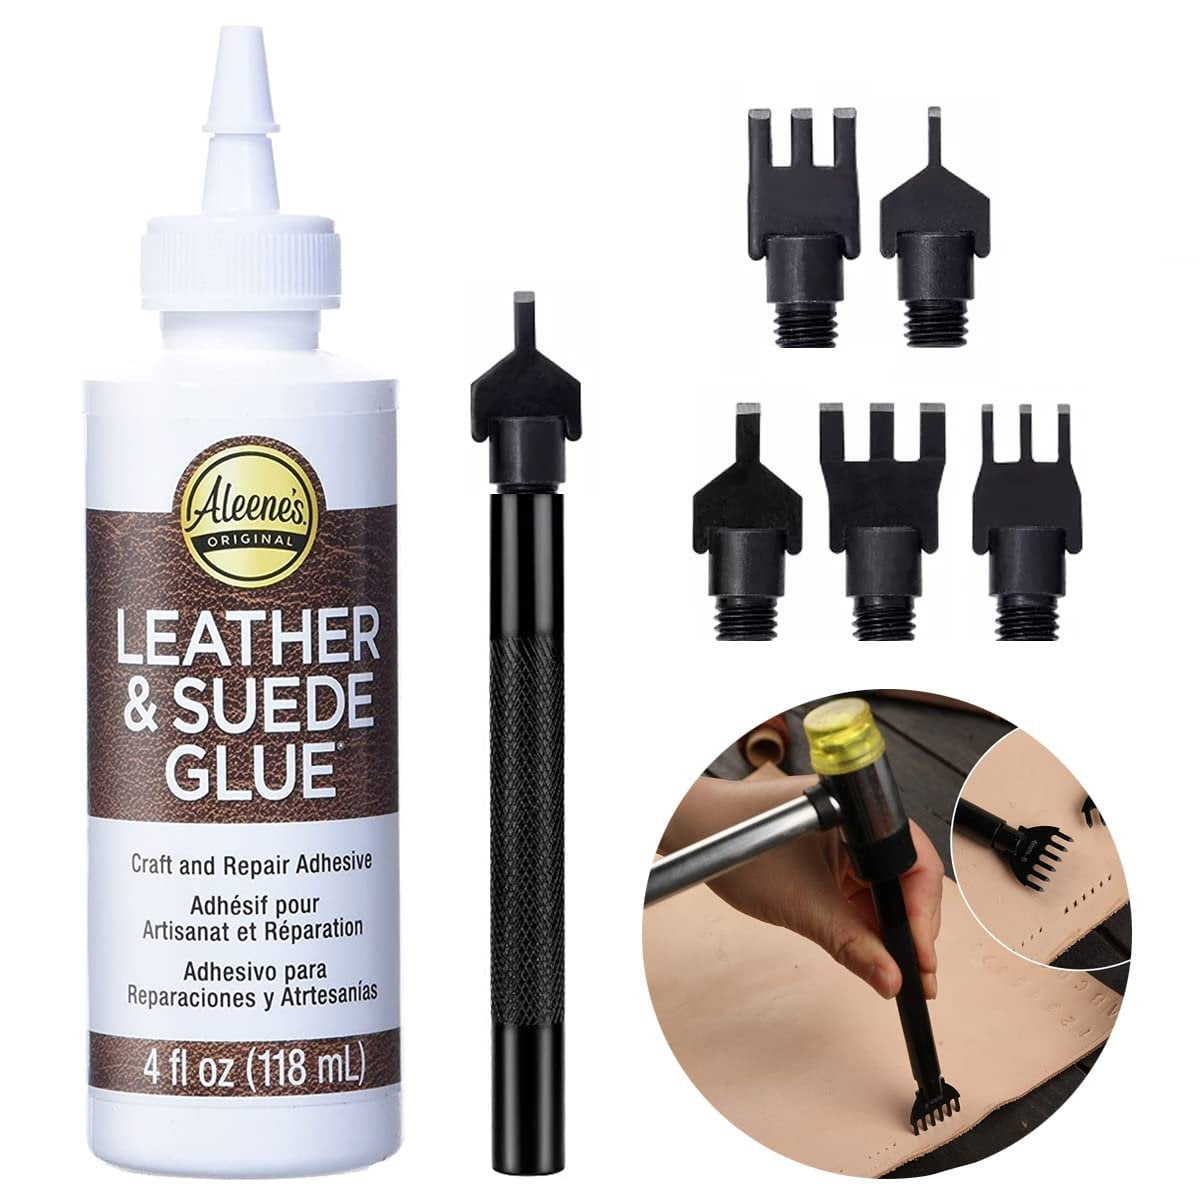  Leather Glue,Leather Fabric Adhesive,Tear Mender Fabric &  Leather Adhesive,Shoe Furniture Fabric Glue Repair Patches for Clothes (1)  : Arts, Crafts & Sewing